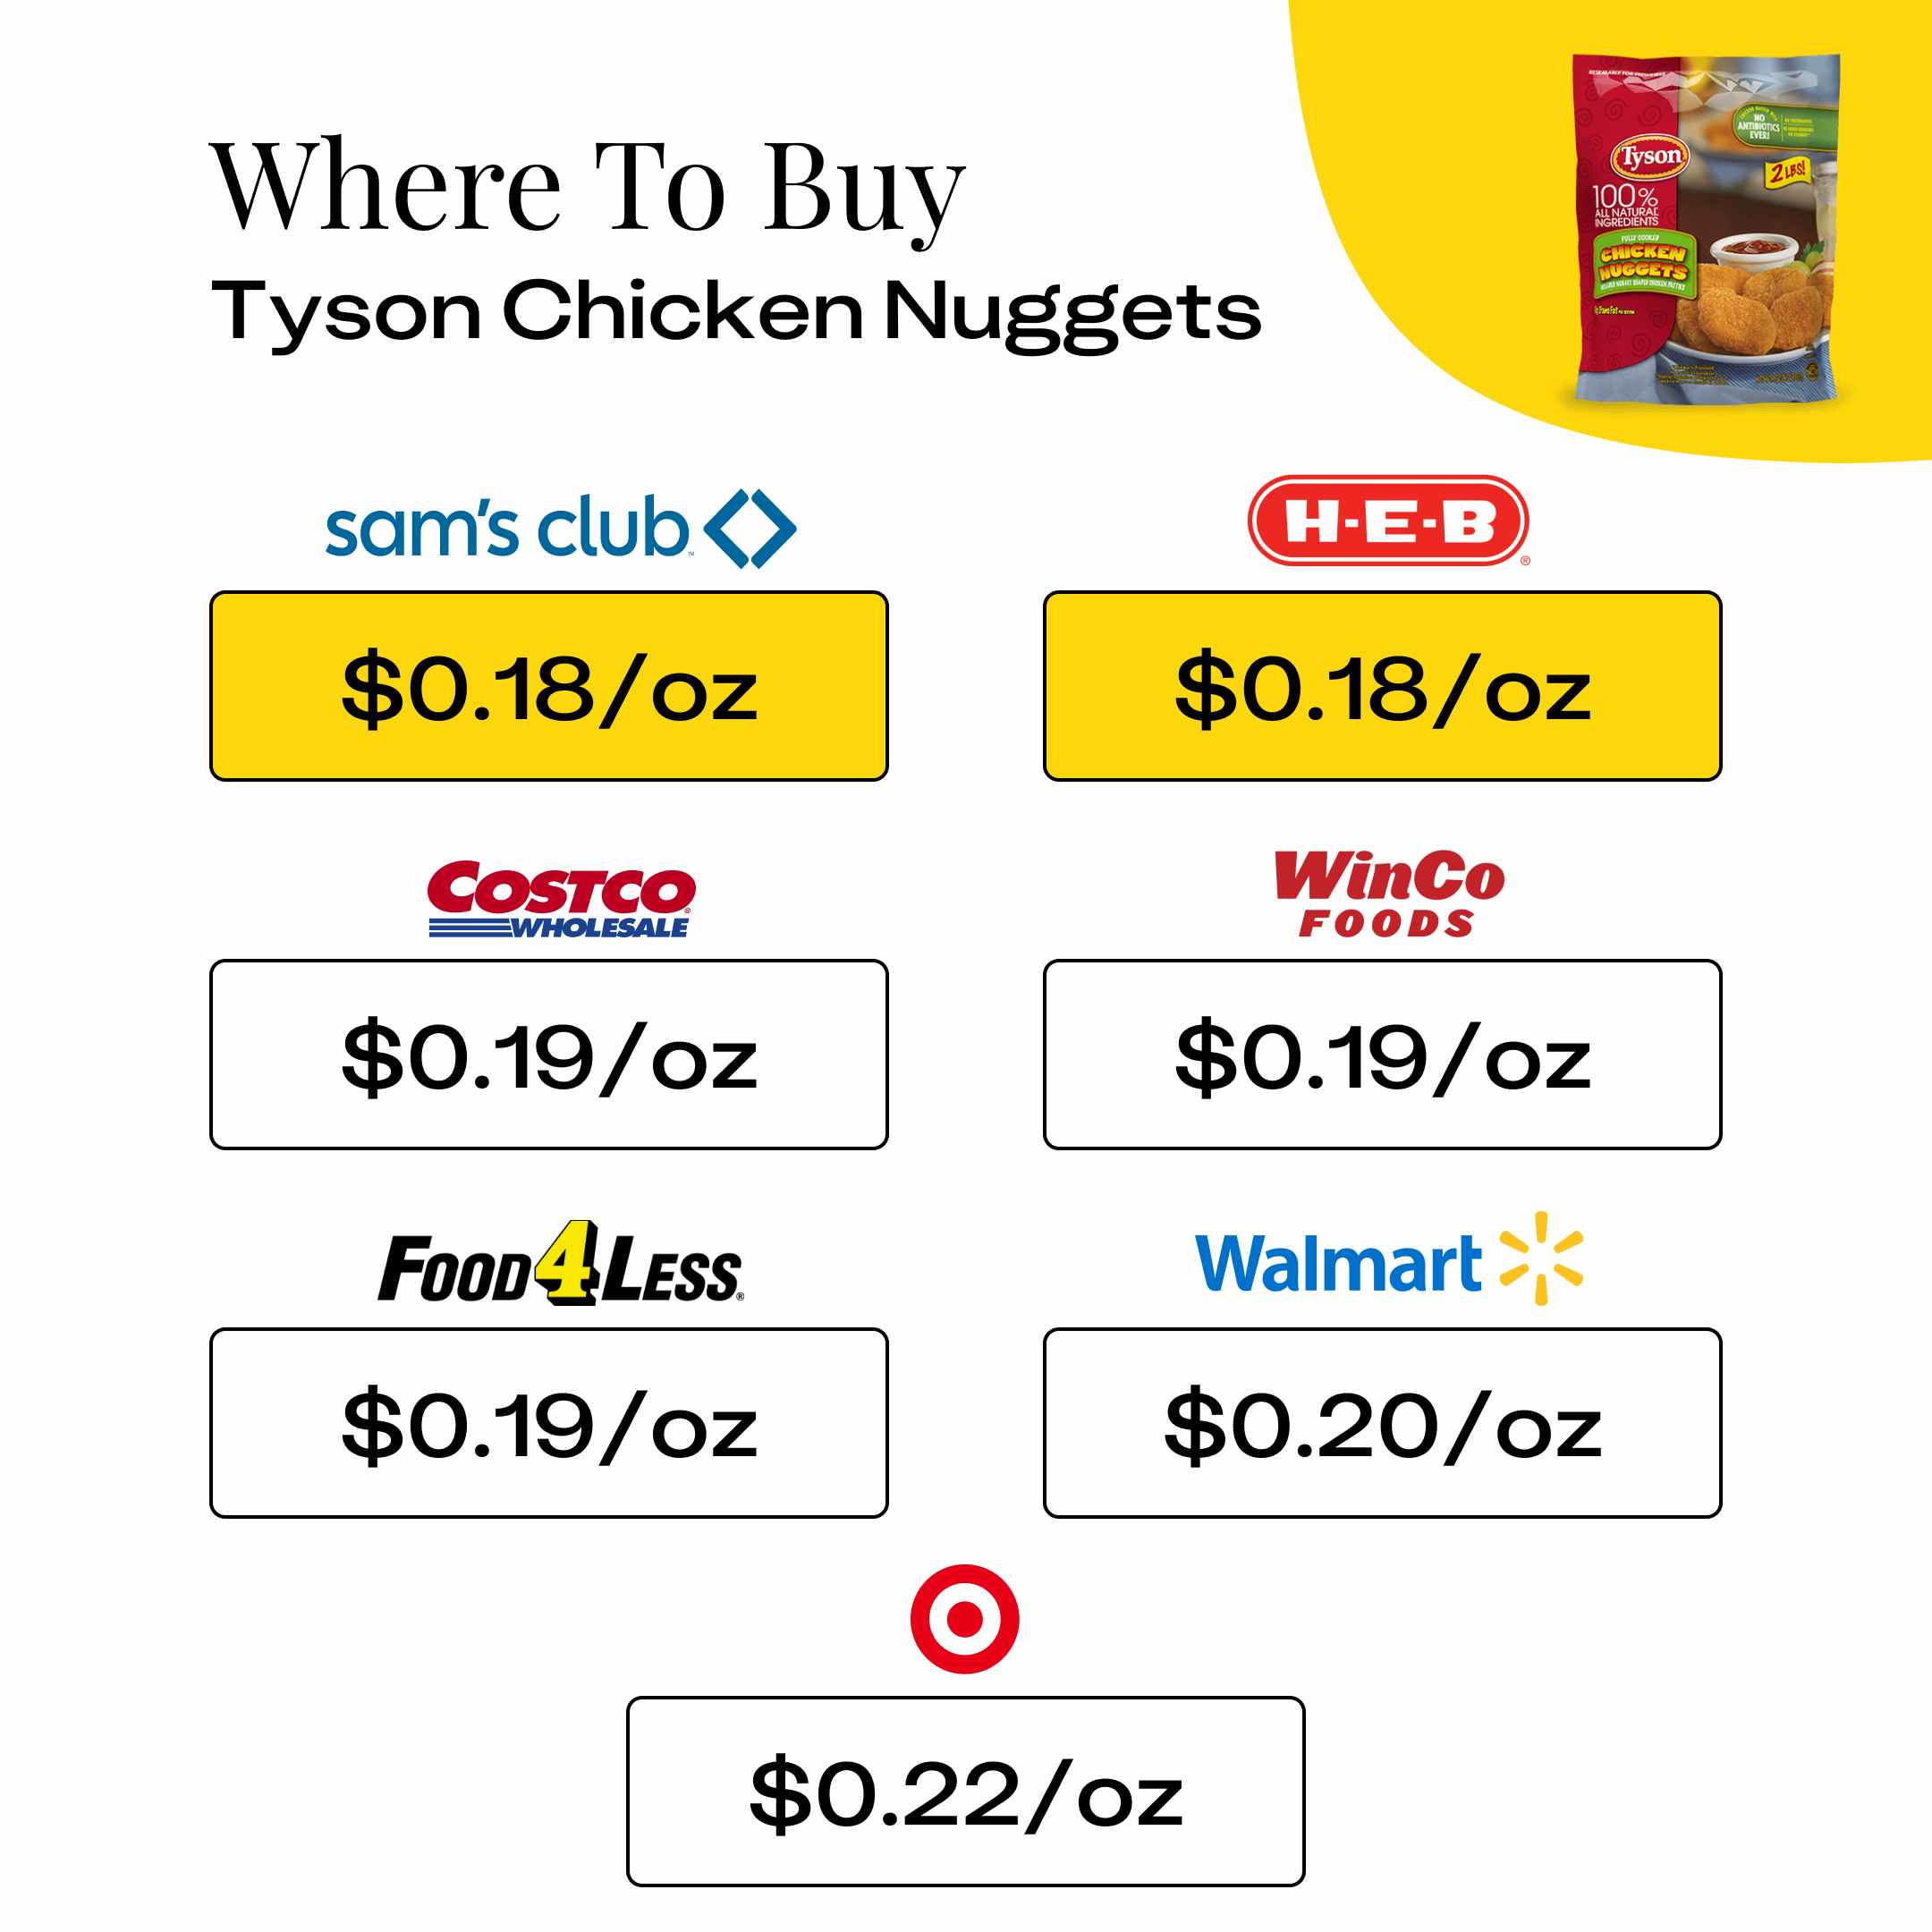 Where To Buy Tyson Chicken Nuggets